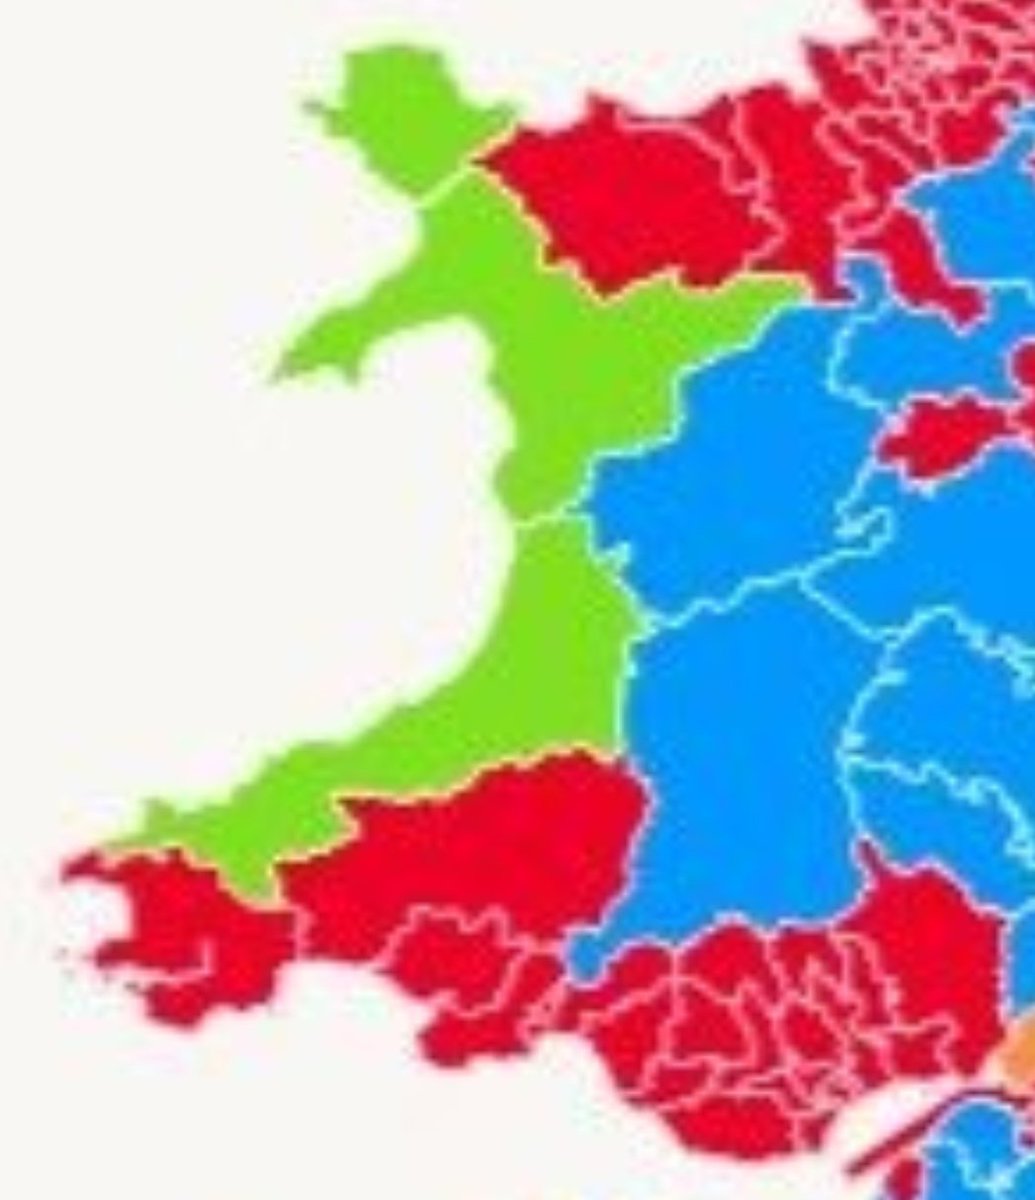 What would it actually take for Brecon & Radnorshire and Montgomeryshire to not vote Tory? 😂